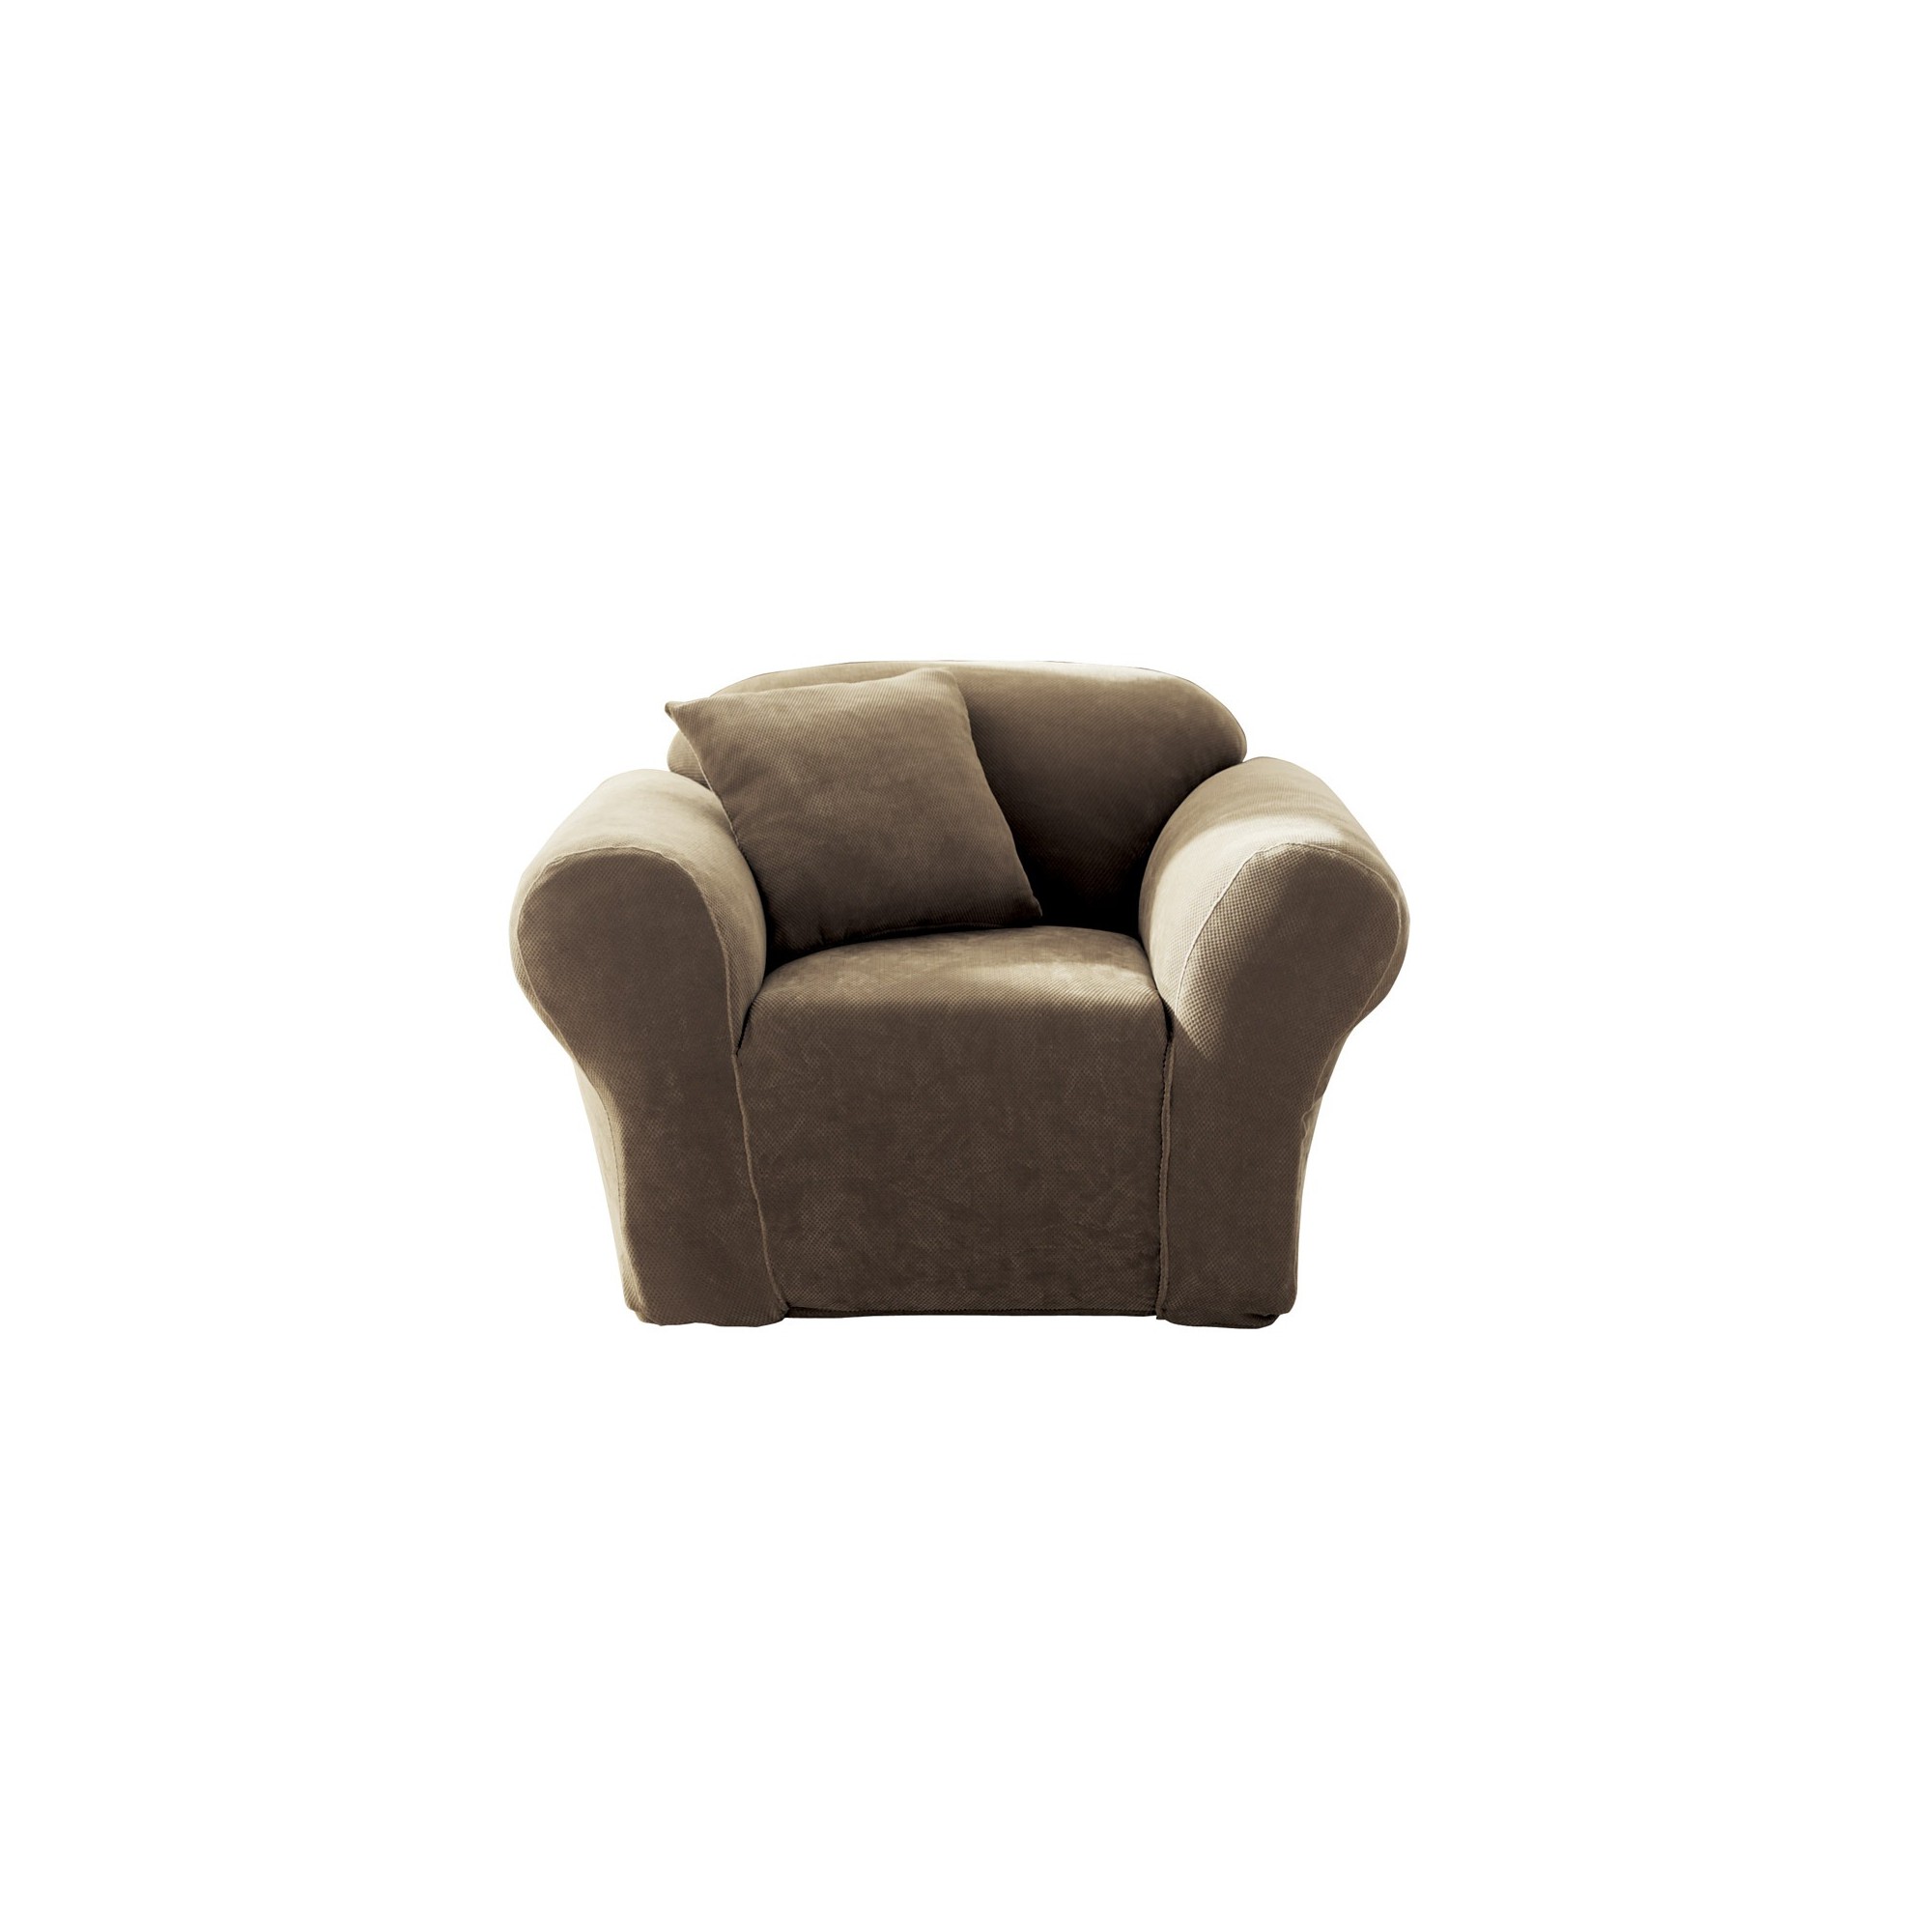 Stretch Pique Chair Slipcover Taupe - Sure Fit, Brown